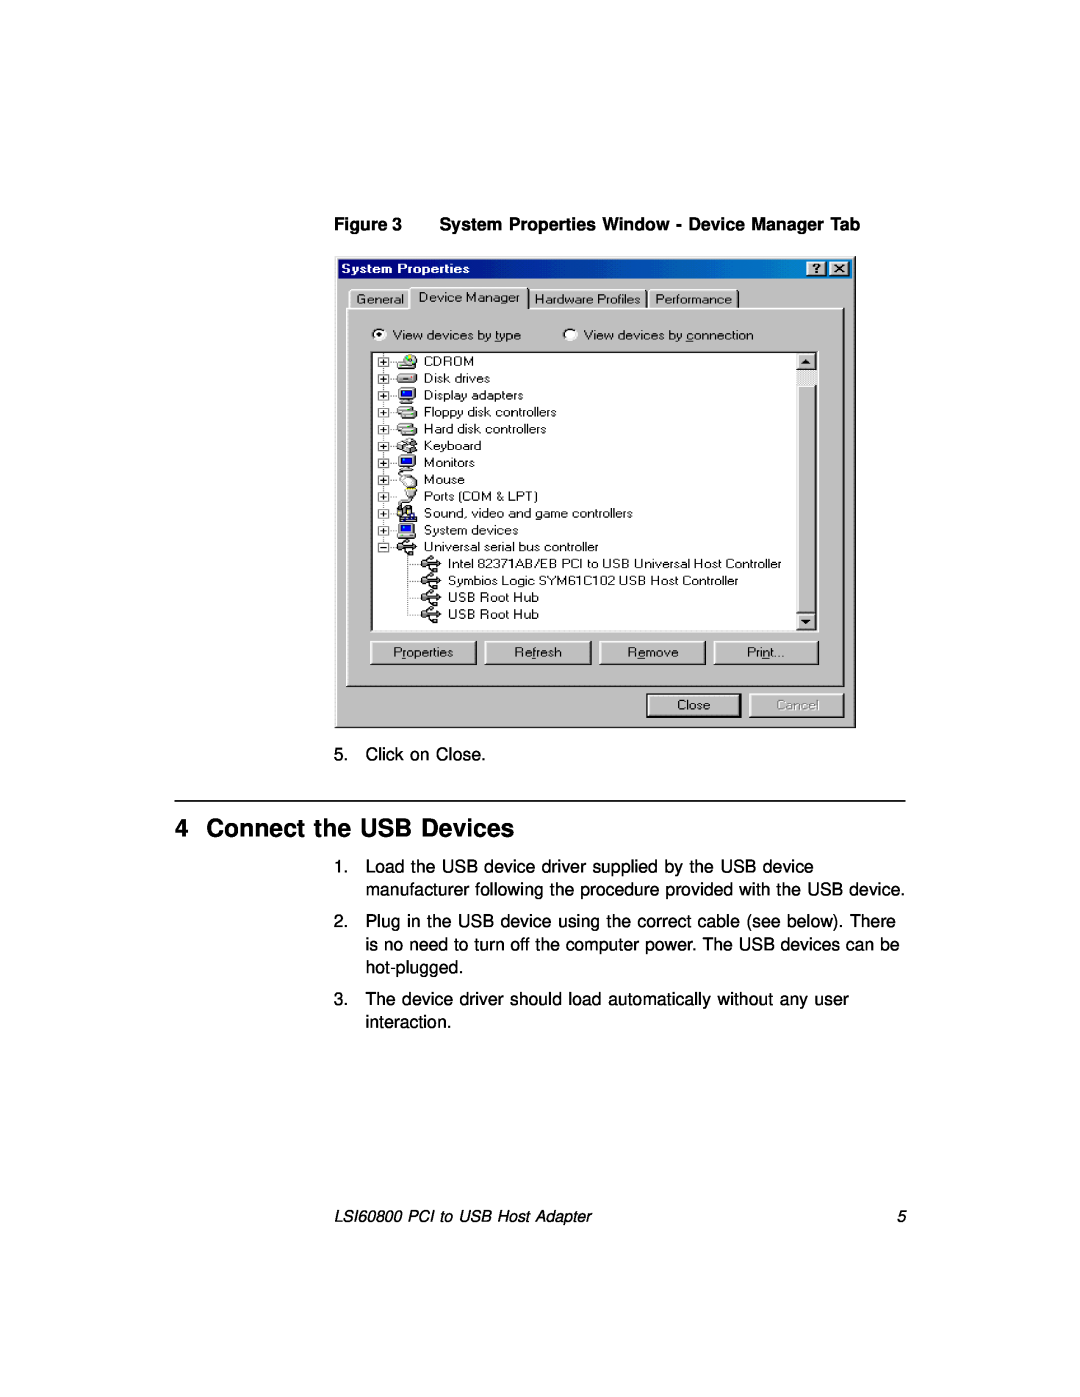 LSI 60800 manual Connect the USB Devices, System Properties Window - Device Manager Tab 